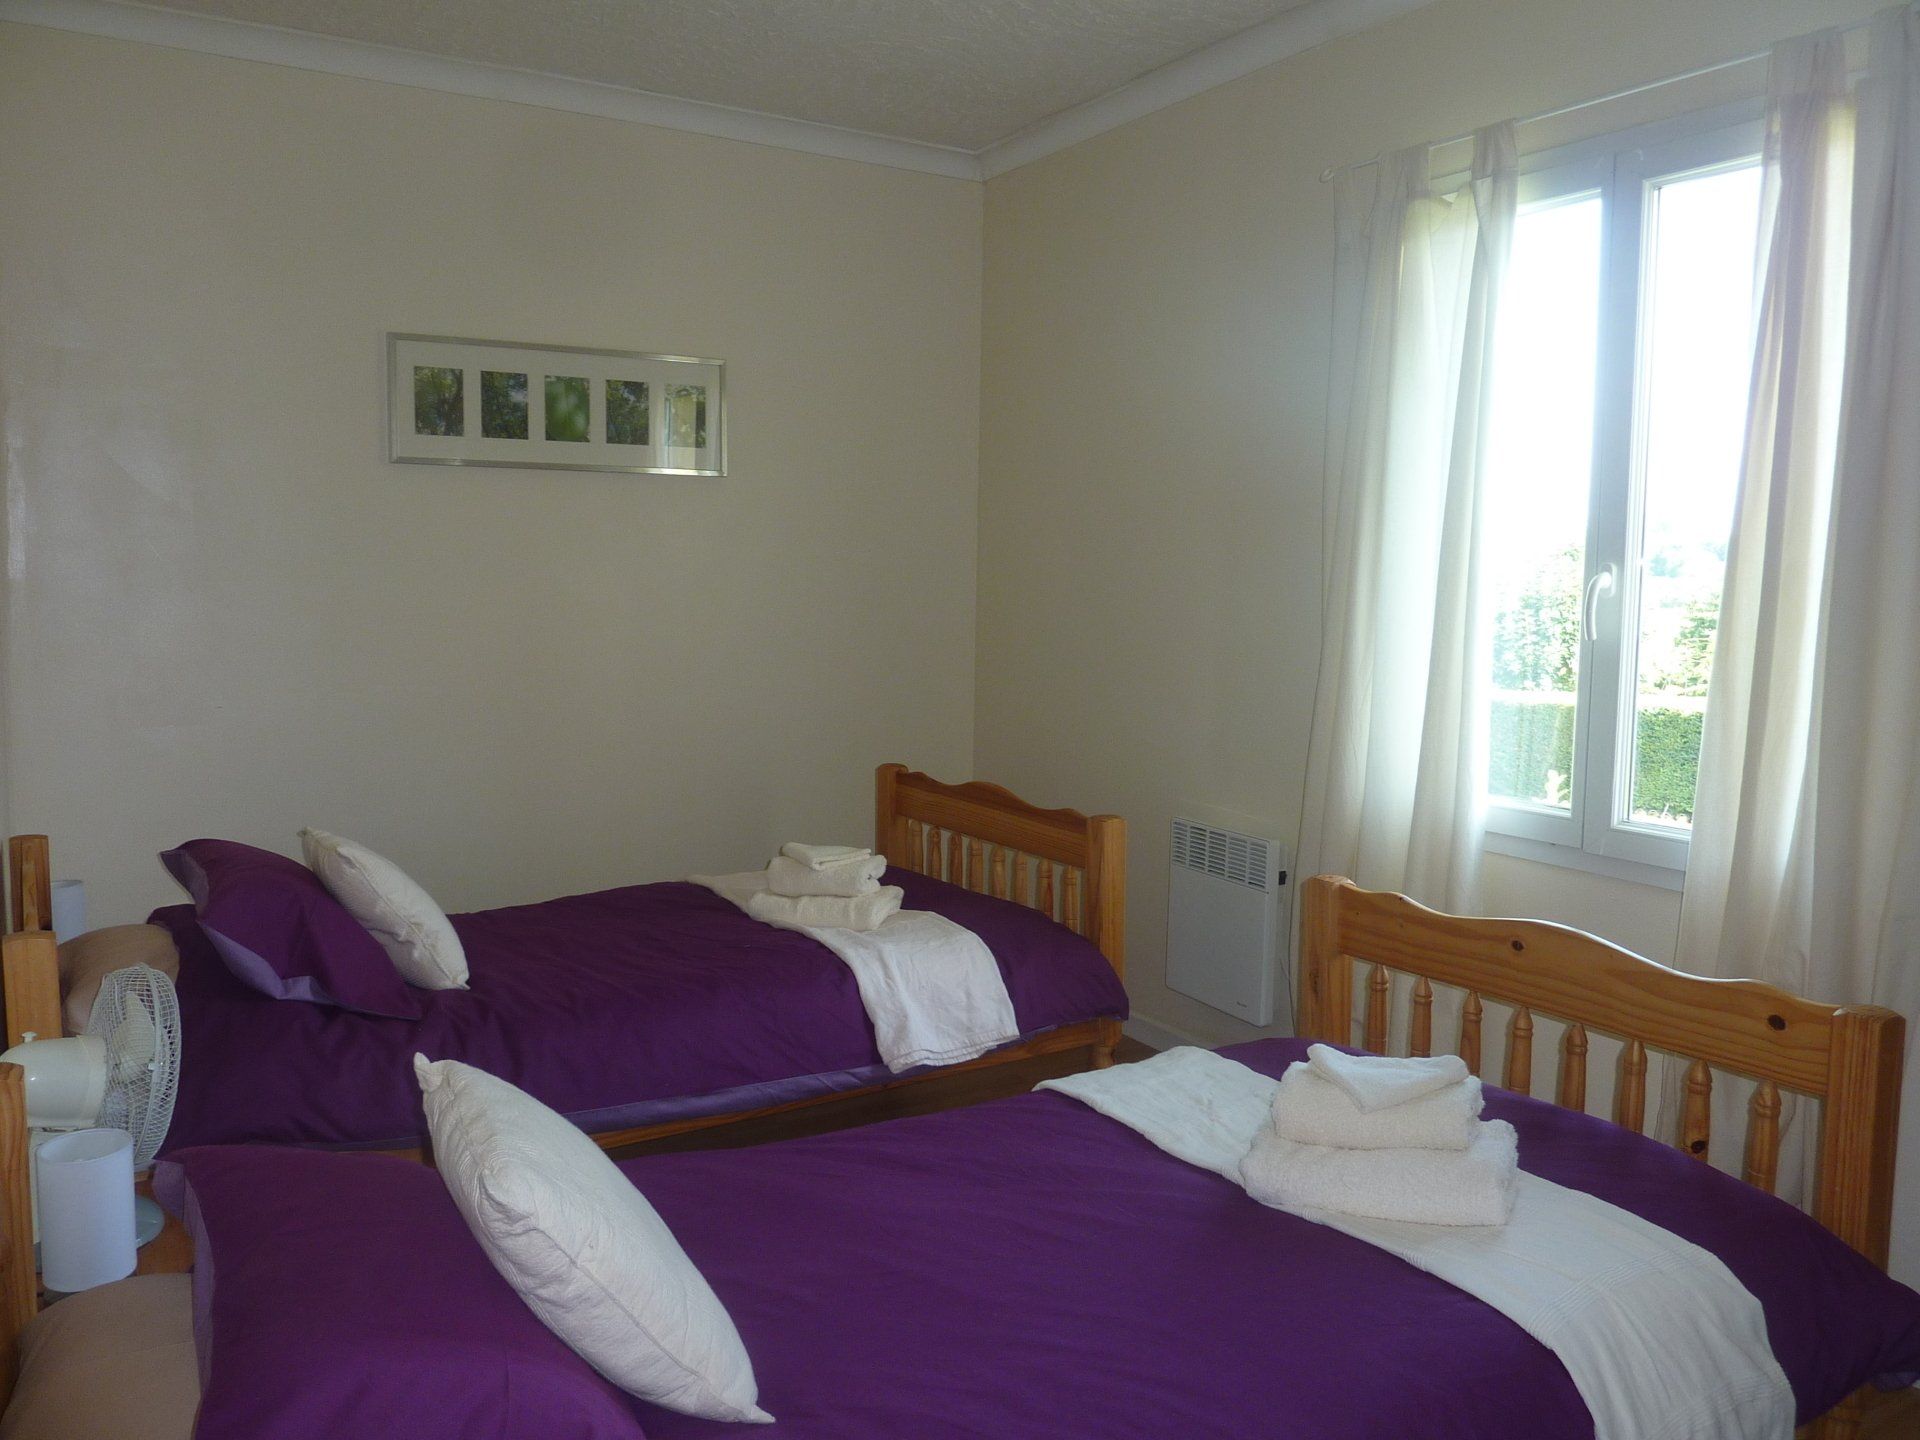 twin beds with purple bedding